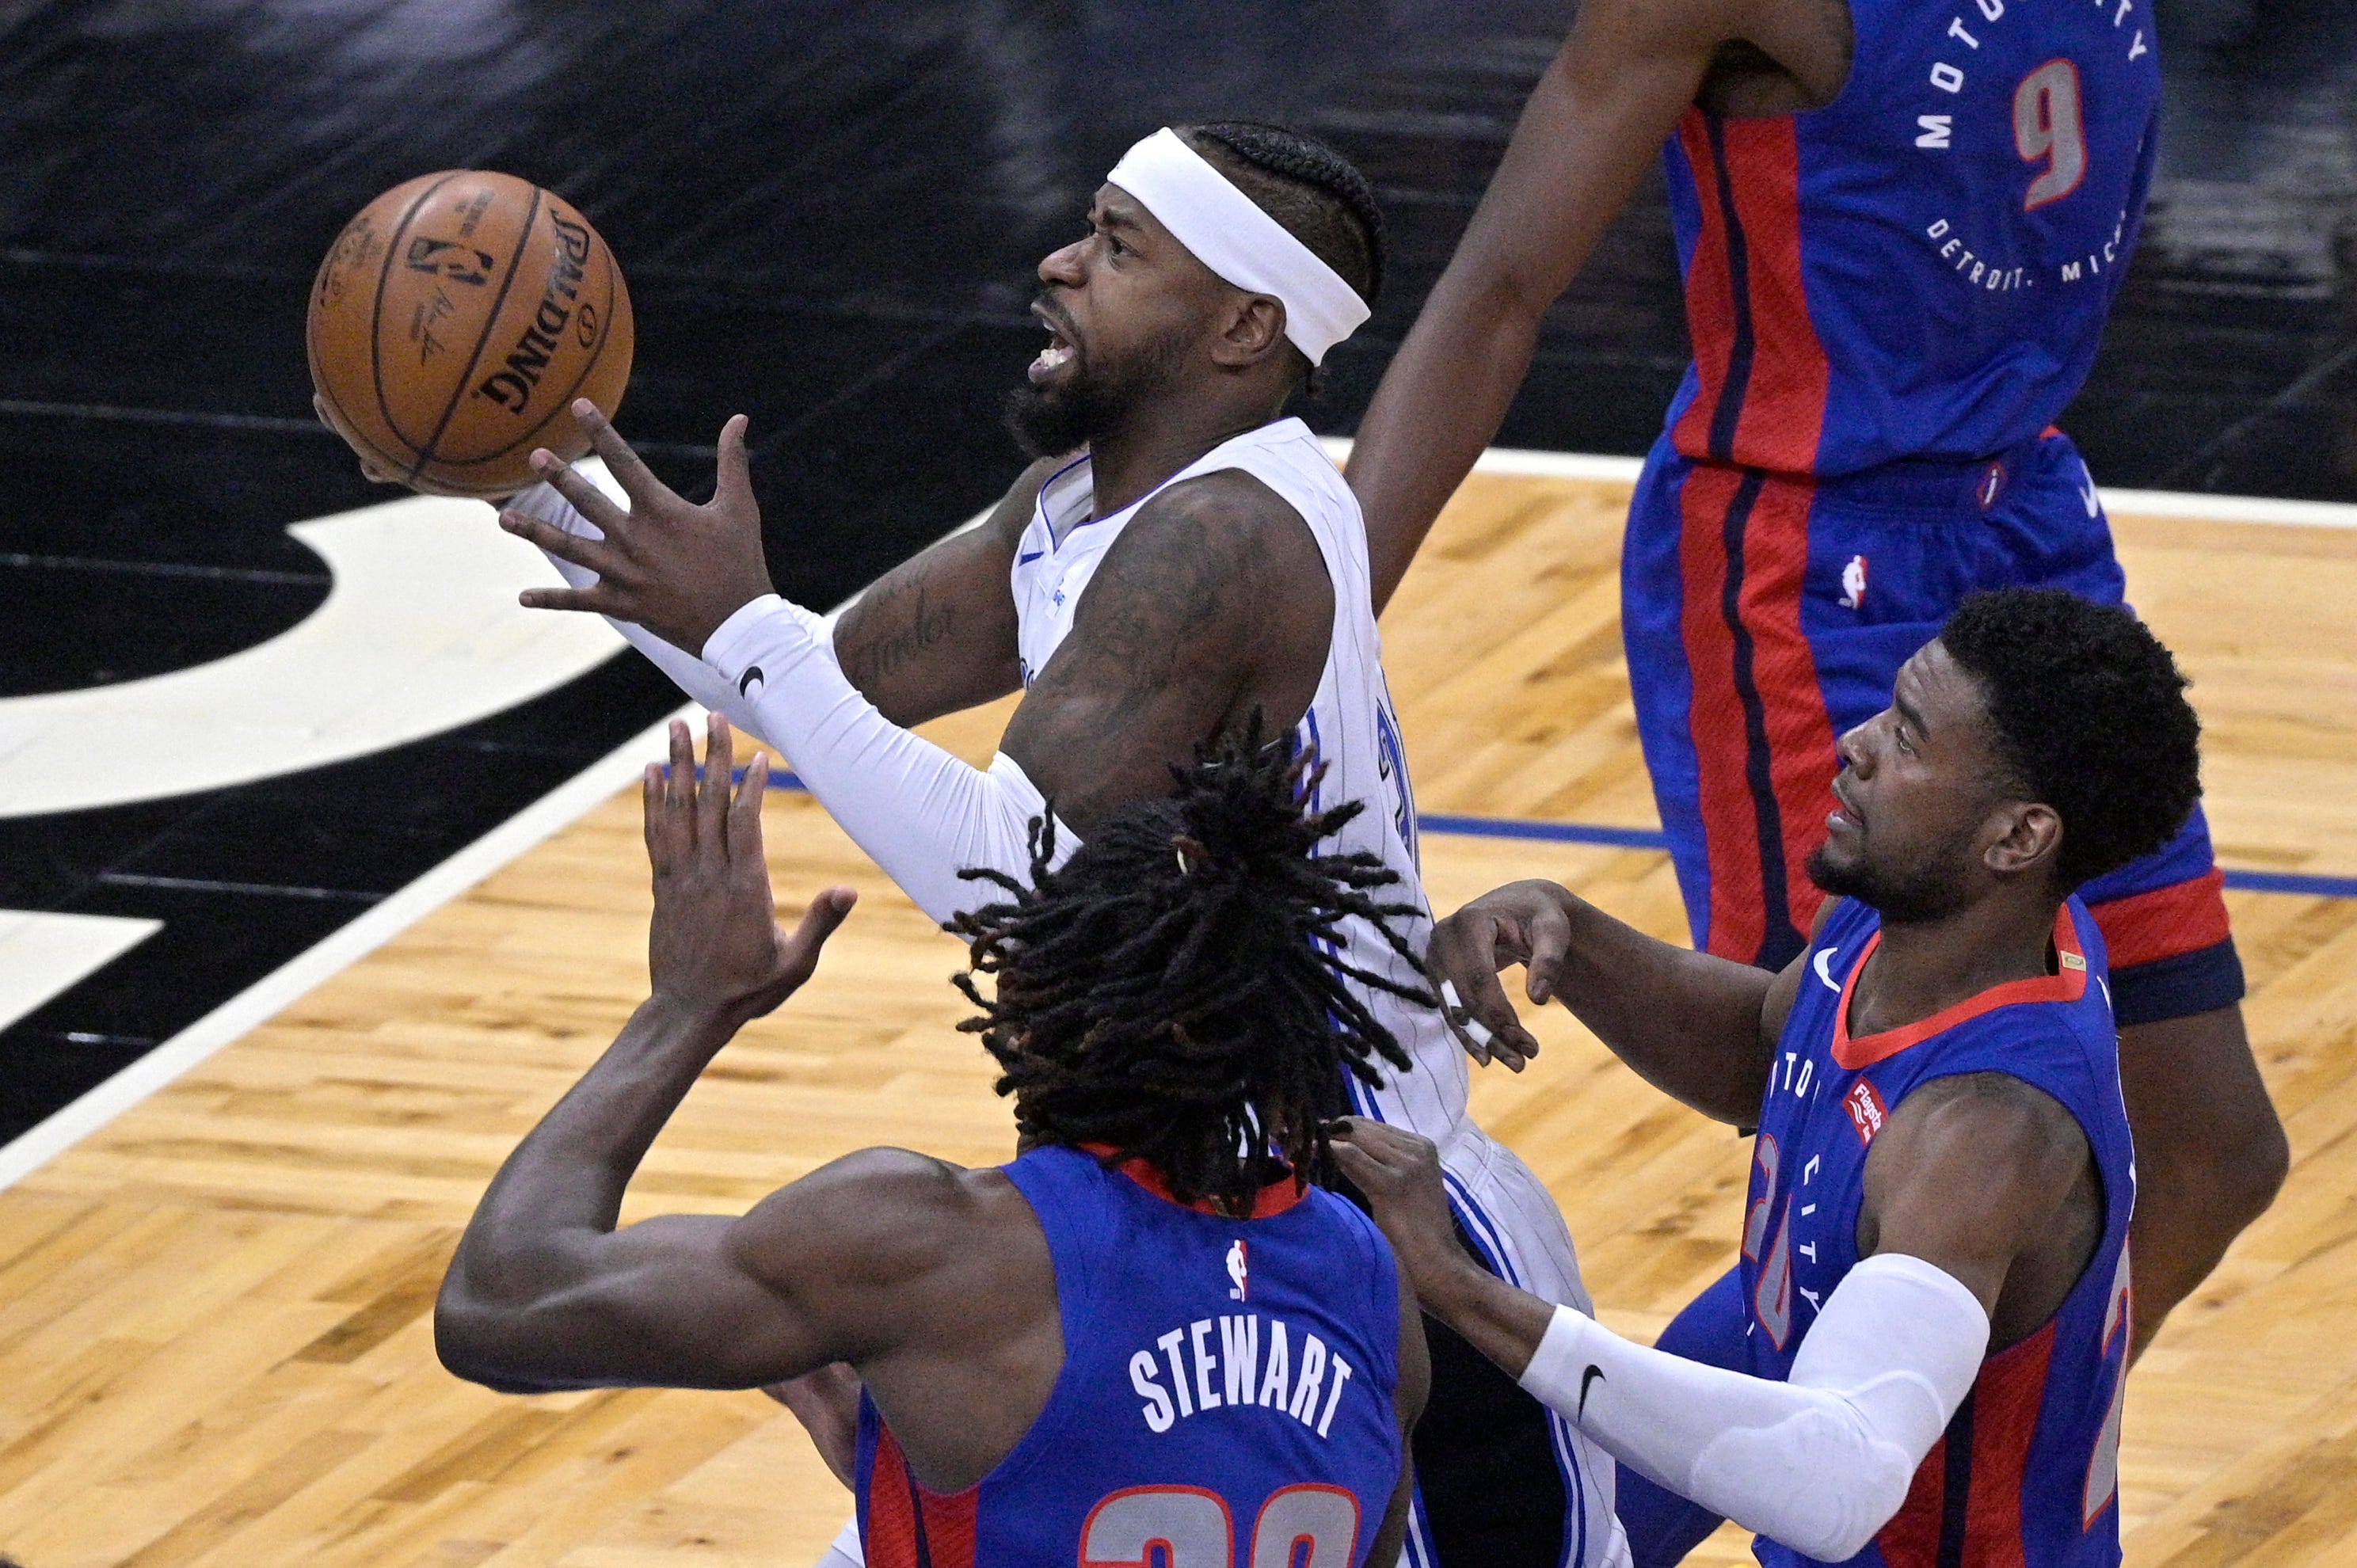 Orlando Magic guard Terrence Ross, center, goes up for a shot in front of Detroit Pistons center Isaiah Stewart, left, and guard Josh Jackson, right, during the first half of an NBA basketball game.